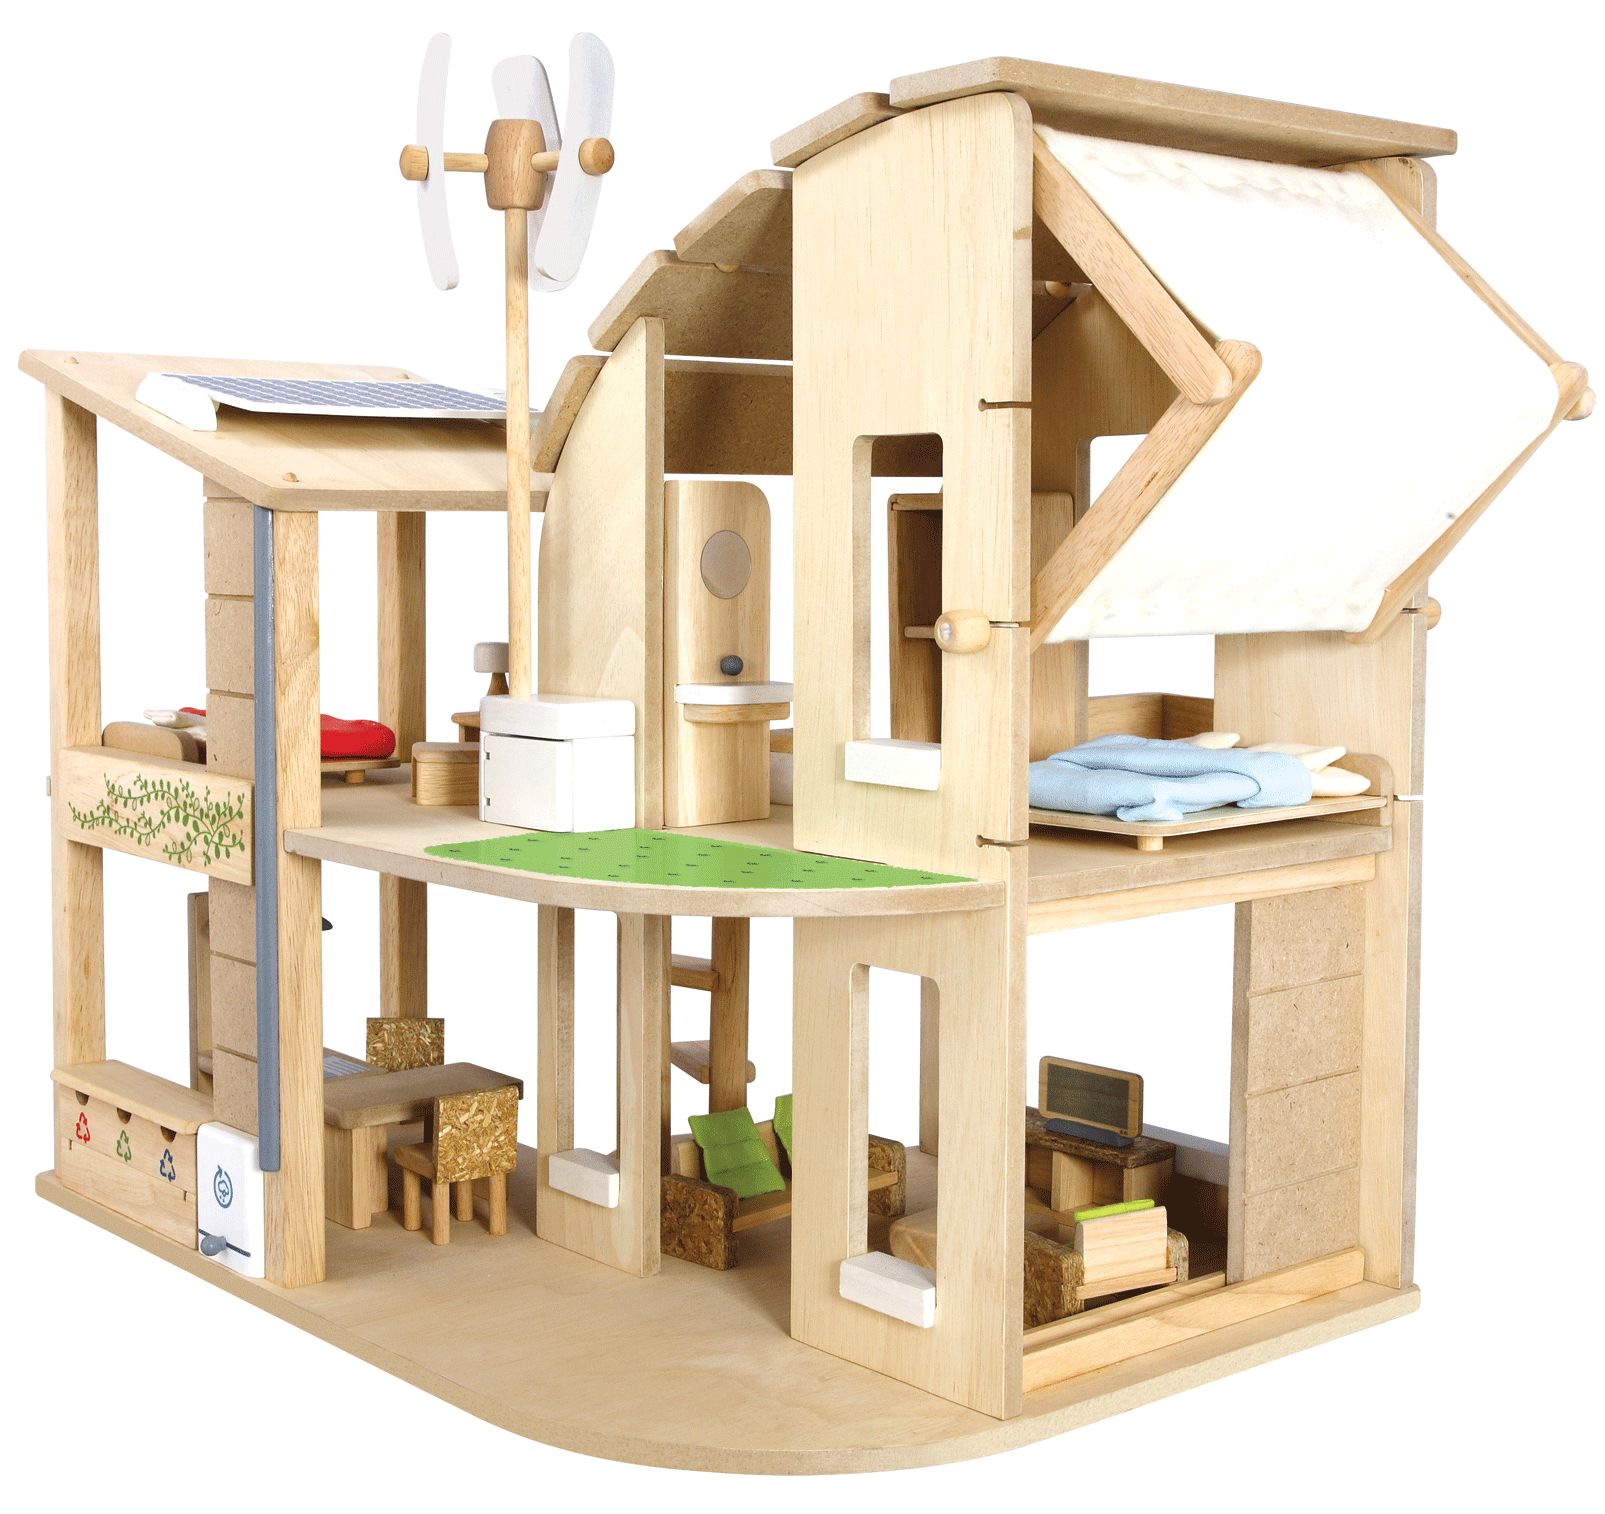 Wooden Playhouse Furniture Plans Free Download plans for 